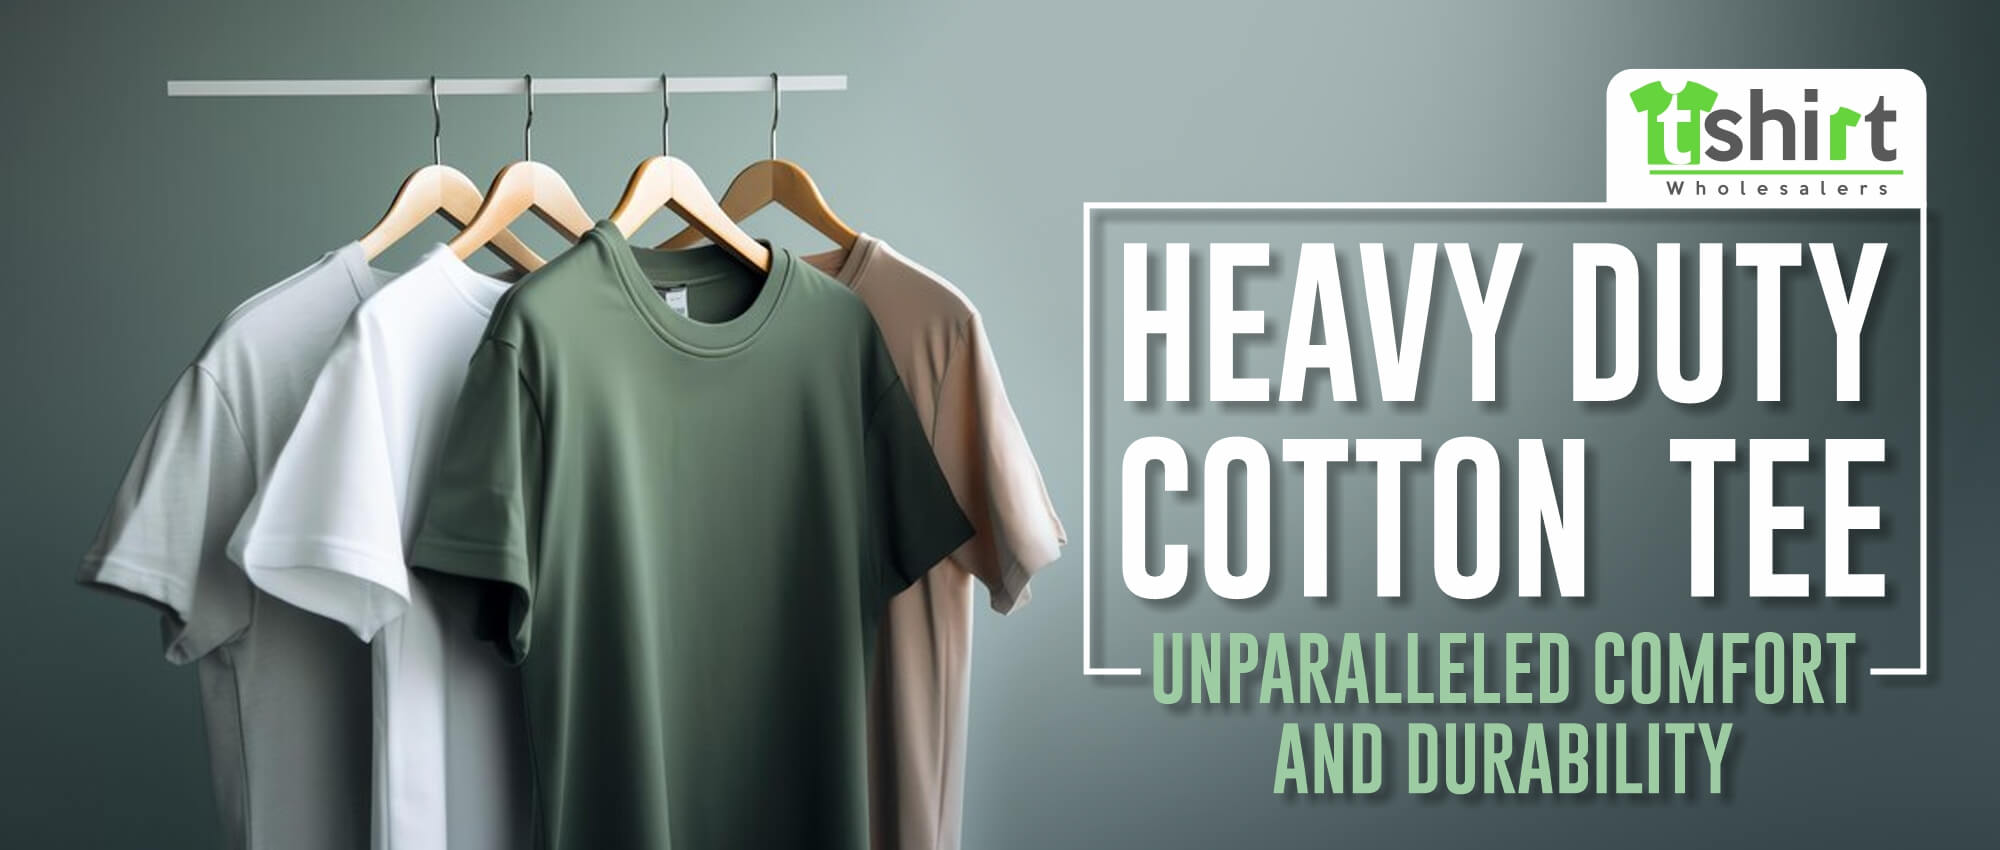 HEAVY DUTY COTTON TEE UNPARALLELED COMFORT AND DURABILITY